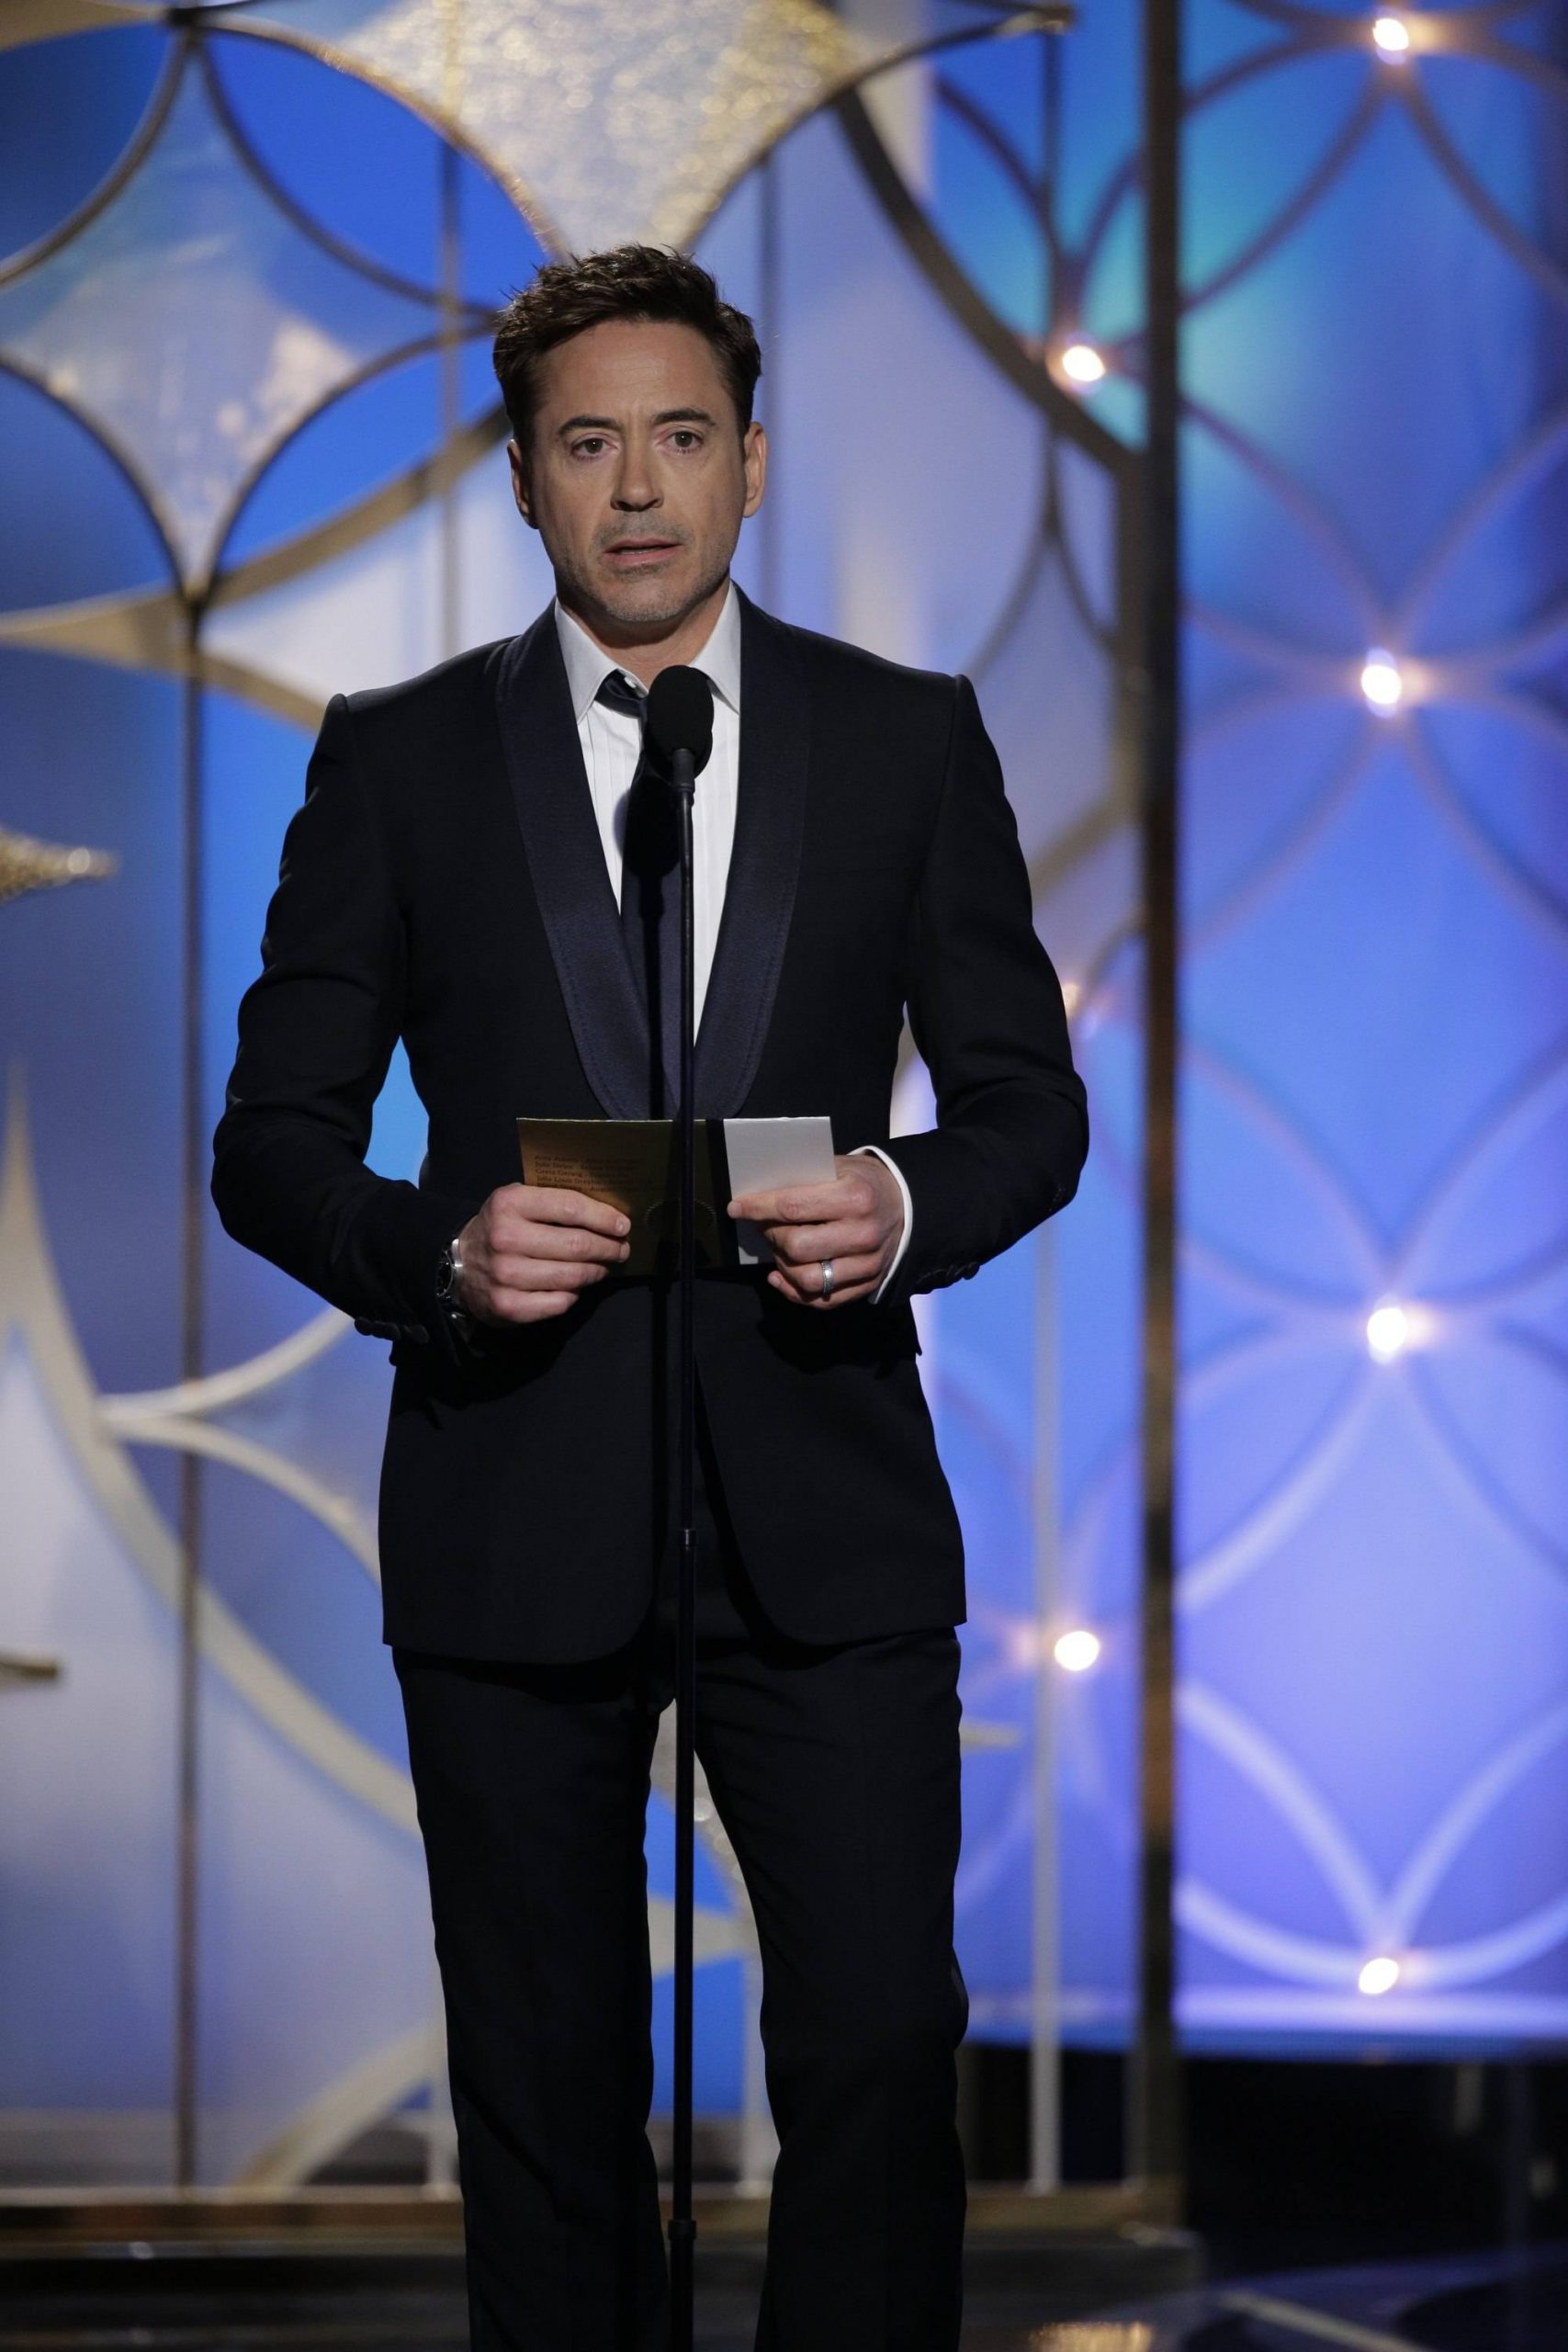 Robert Downey Jr. Wears Jaeger-LeCoultre Onstage at the Golden Globes